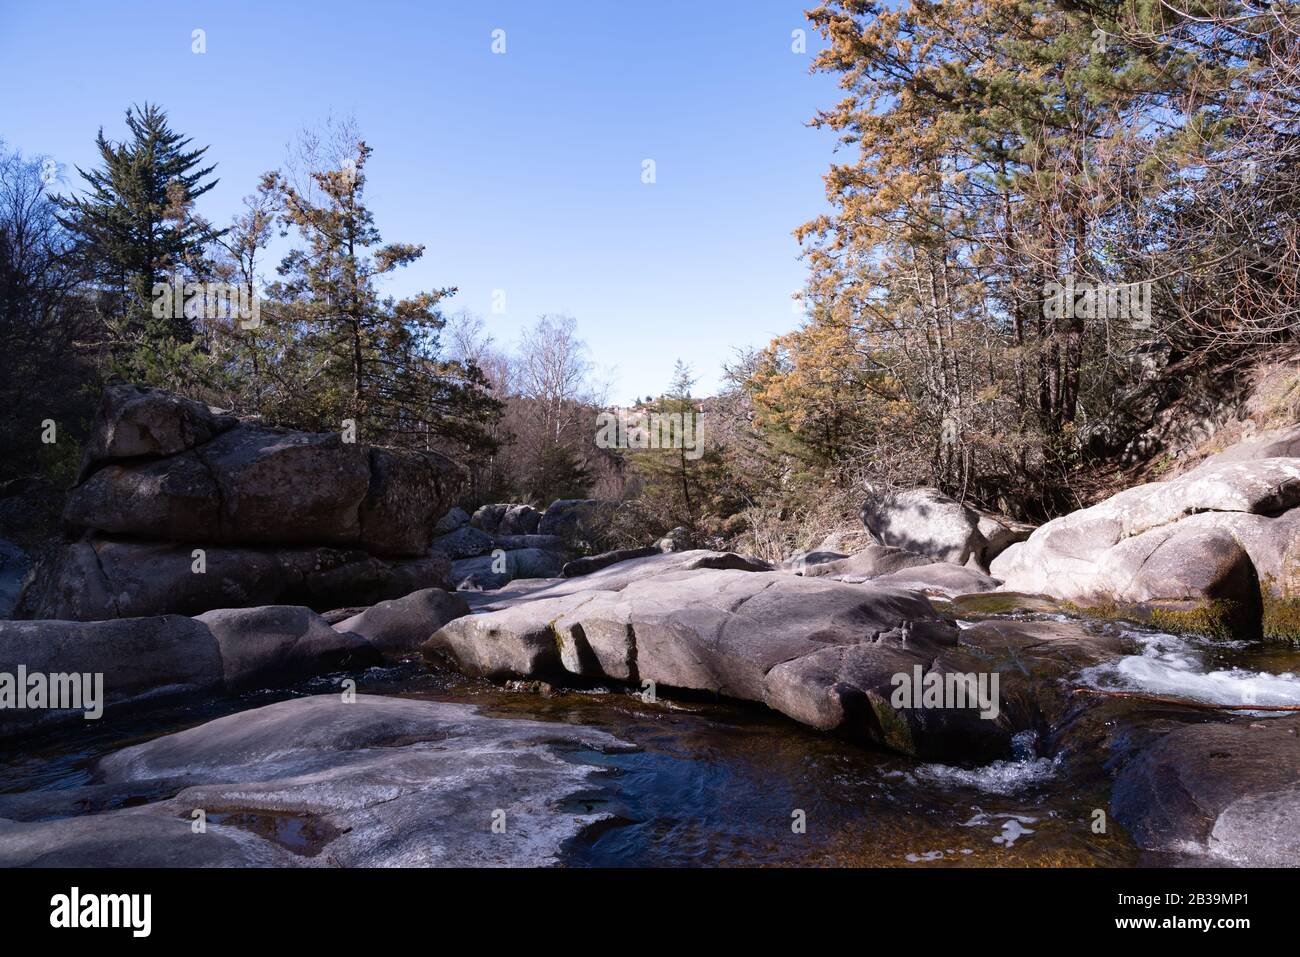 View of a river full of rocks and surrounded by trees Stock Photo